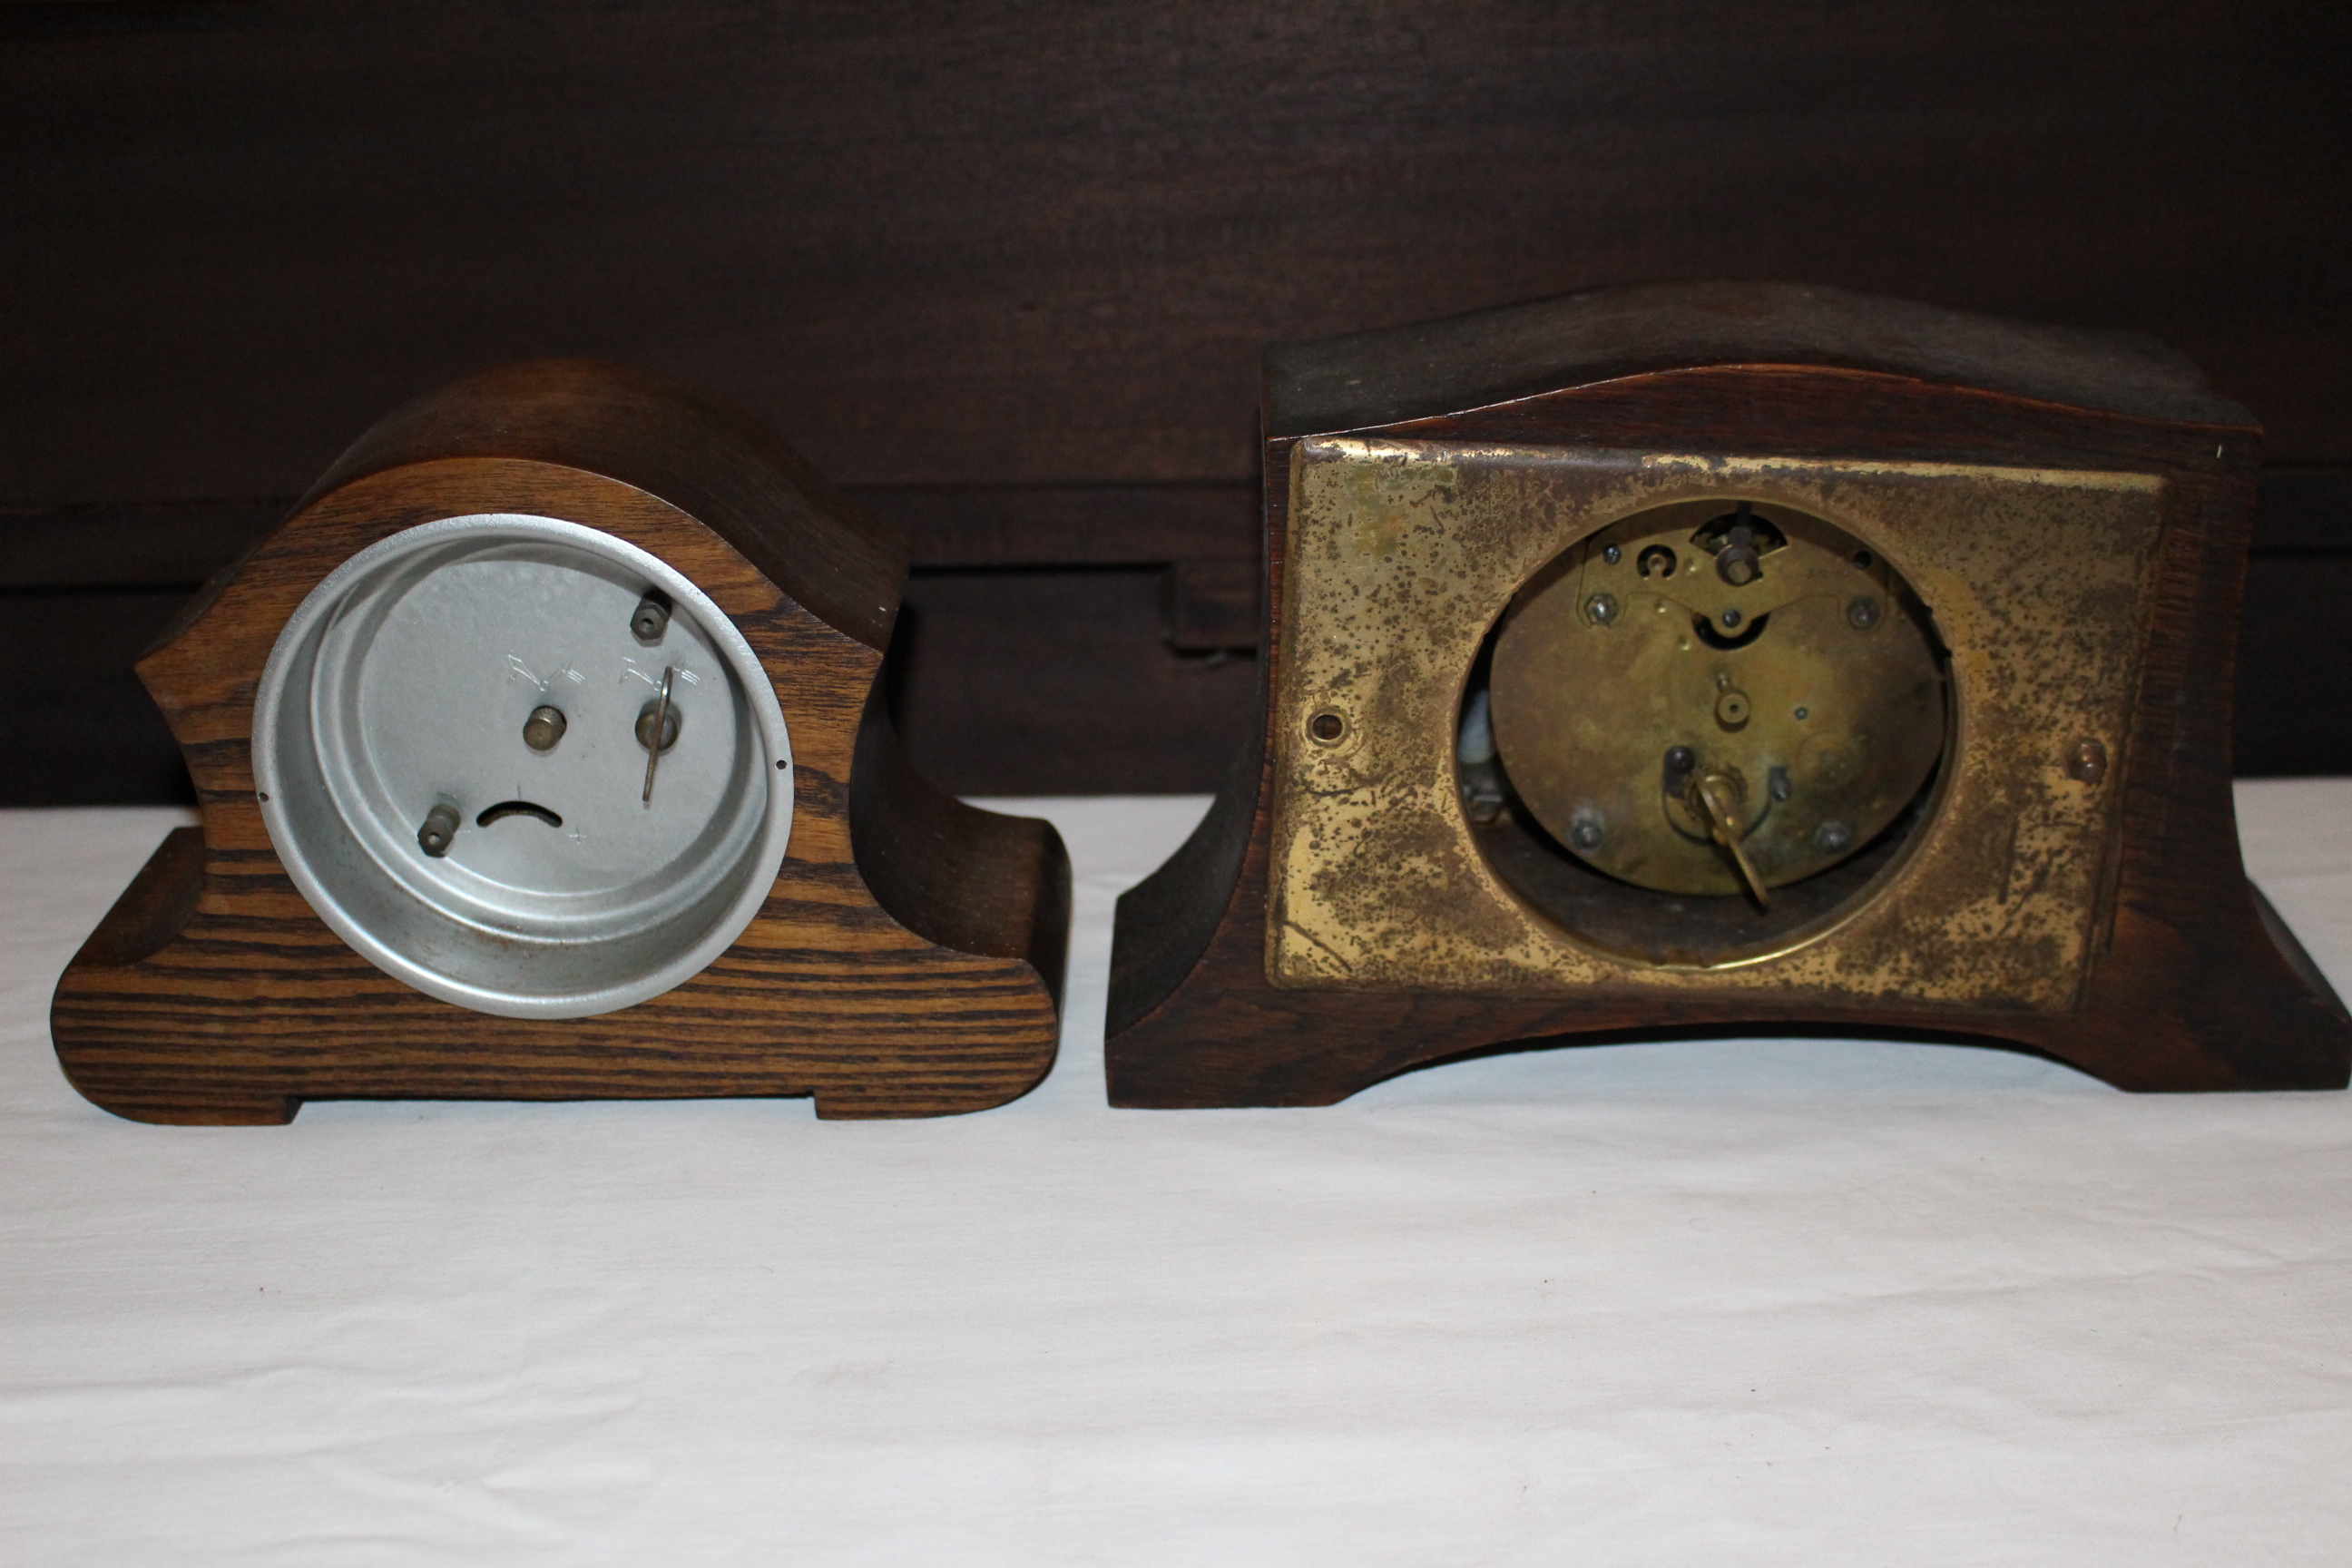 Collection of 5 x wooden mantel clocks some chiming, all mechanical/windup but selling as untested - Bild 4 aus 5